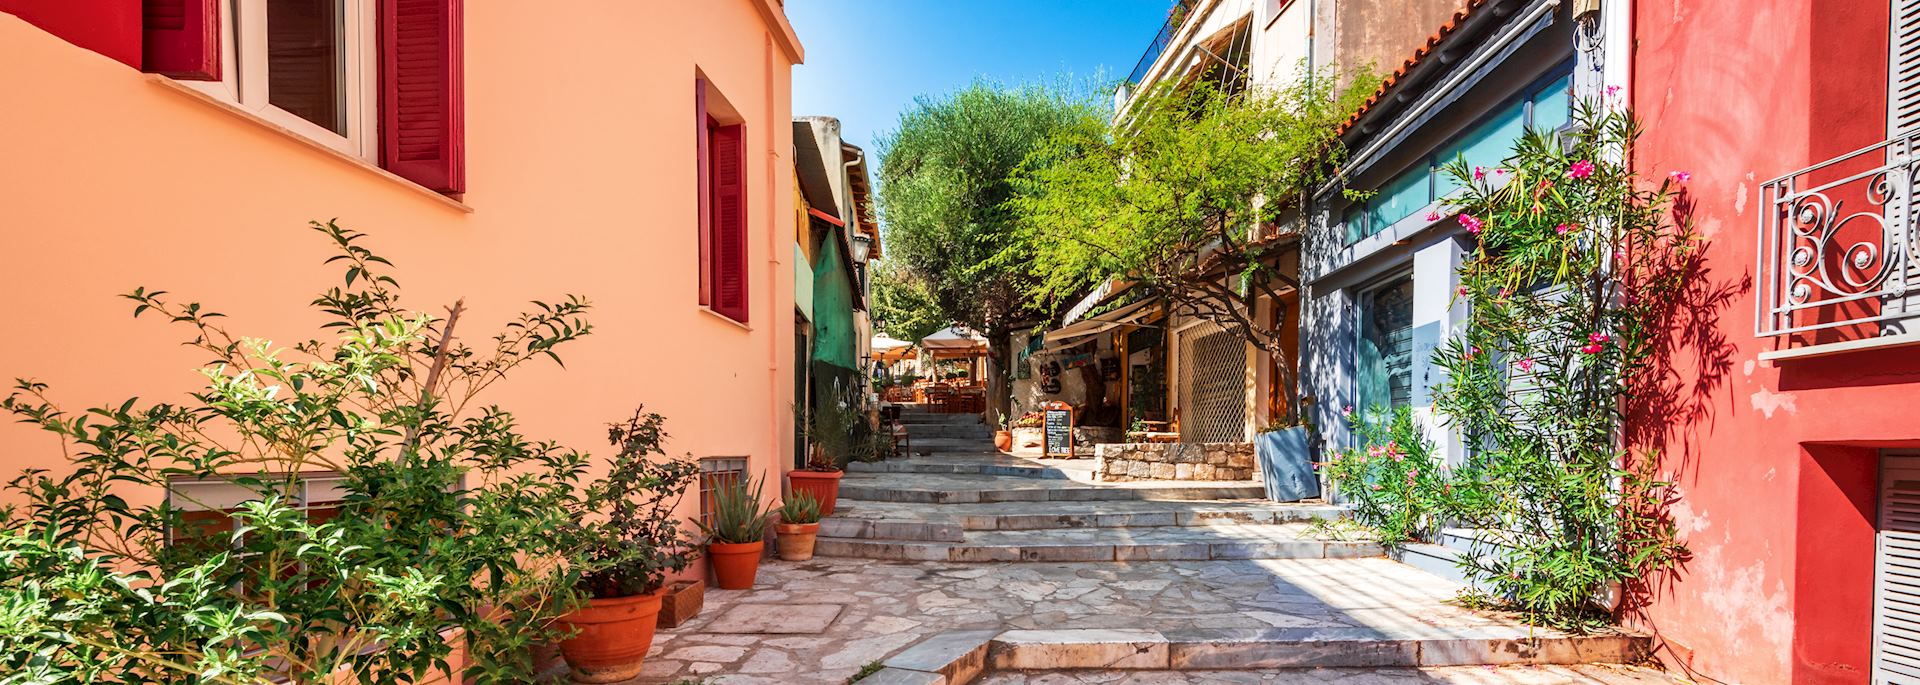 Old street in the Plaka district, Athens